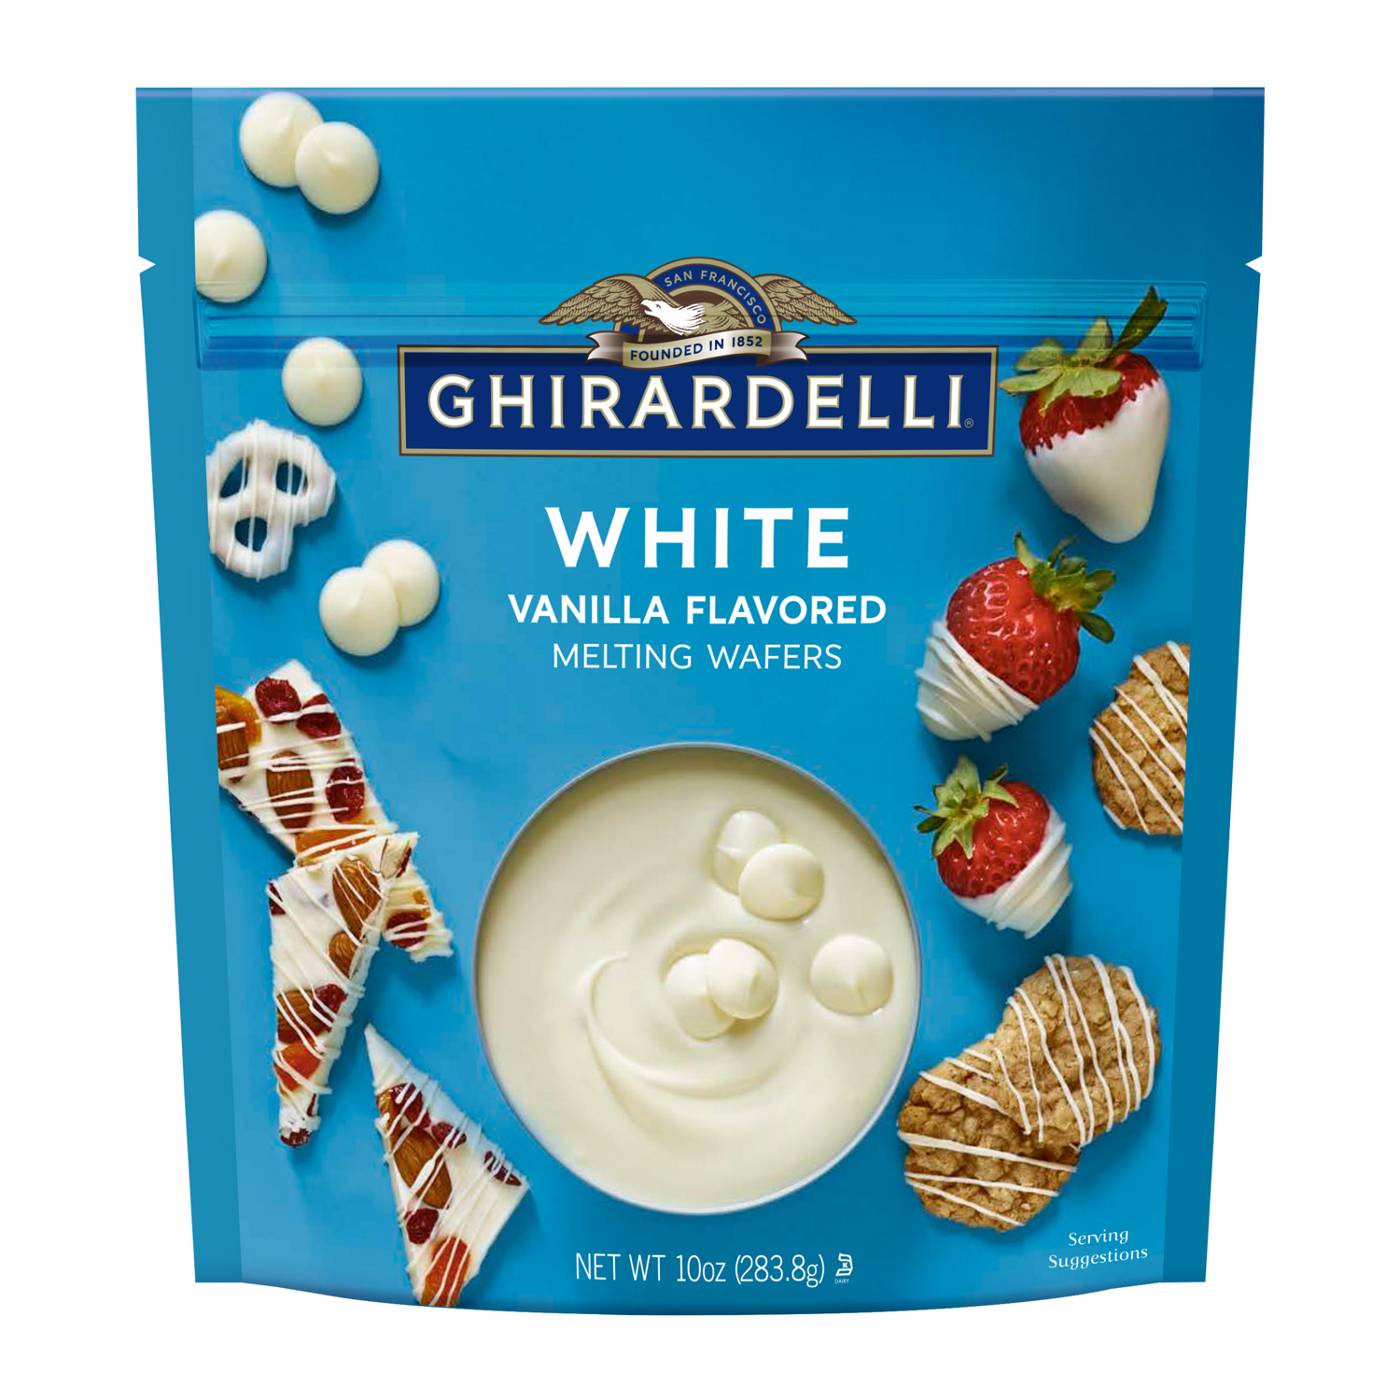 Ghirardelli White Vanilla Flavored Melting Wafers; image 1 of 7